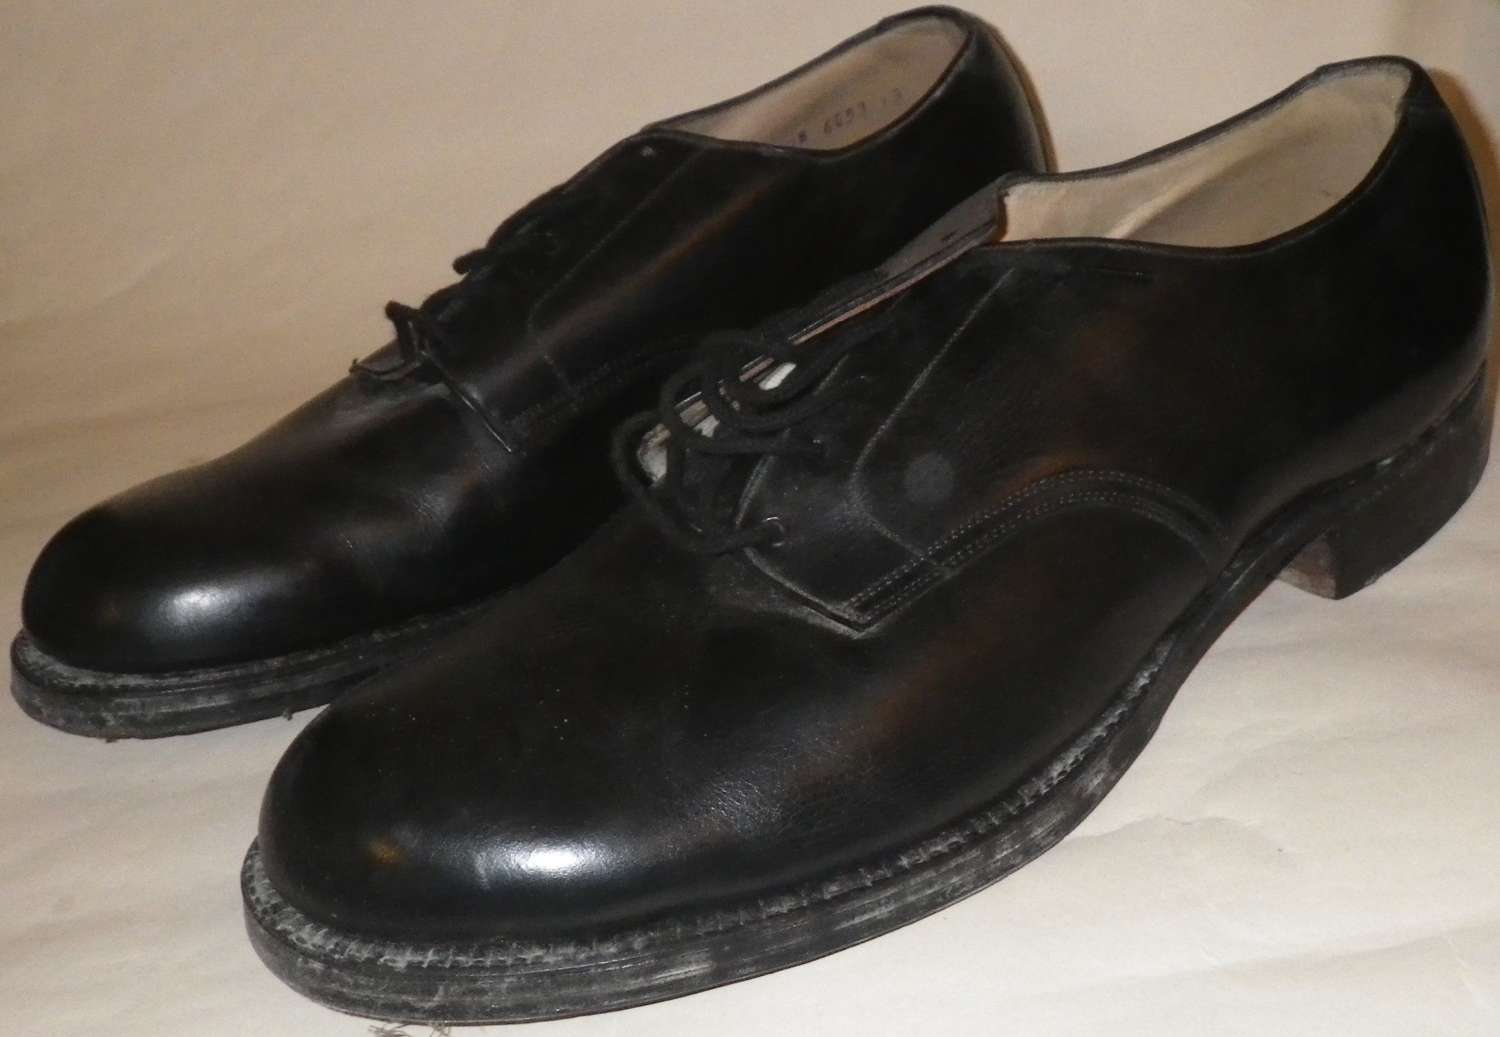 A RARE PAIR OF WWII RCAF SHOES SIZE 12 1/2 D 1942 DATED NEAR MINT